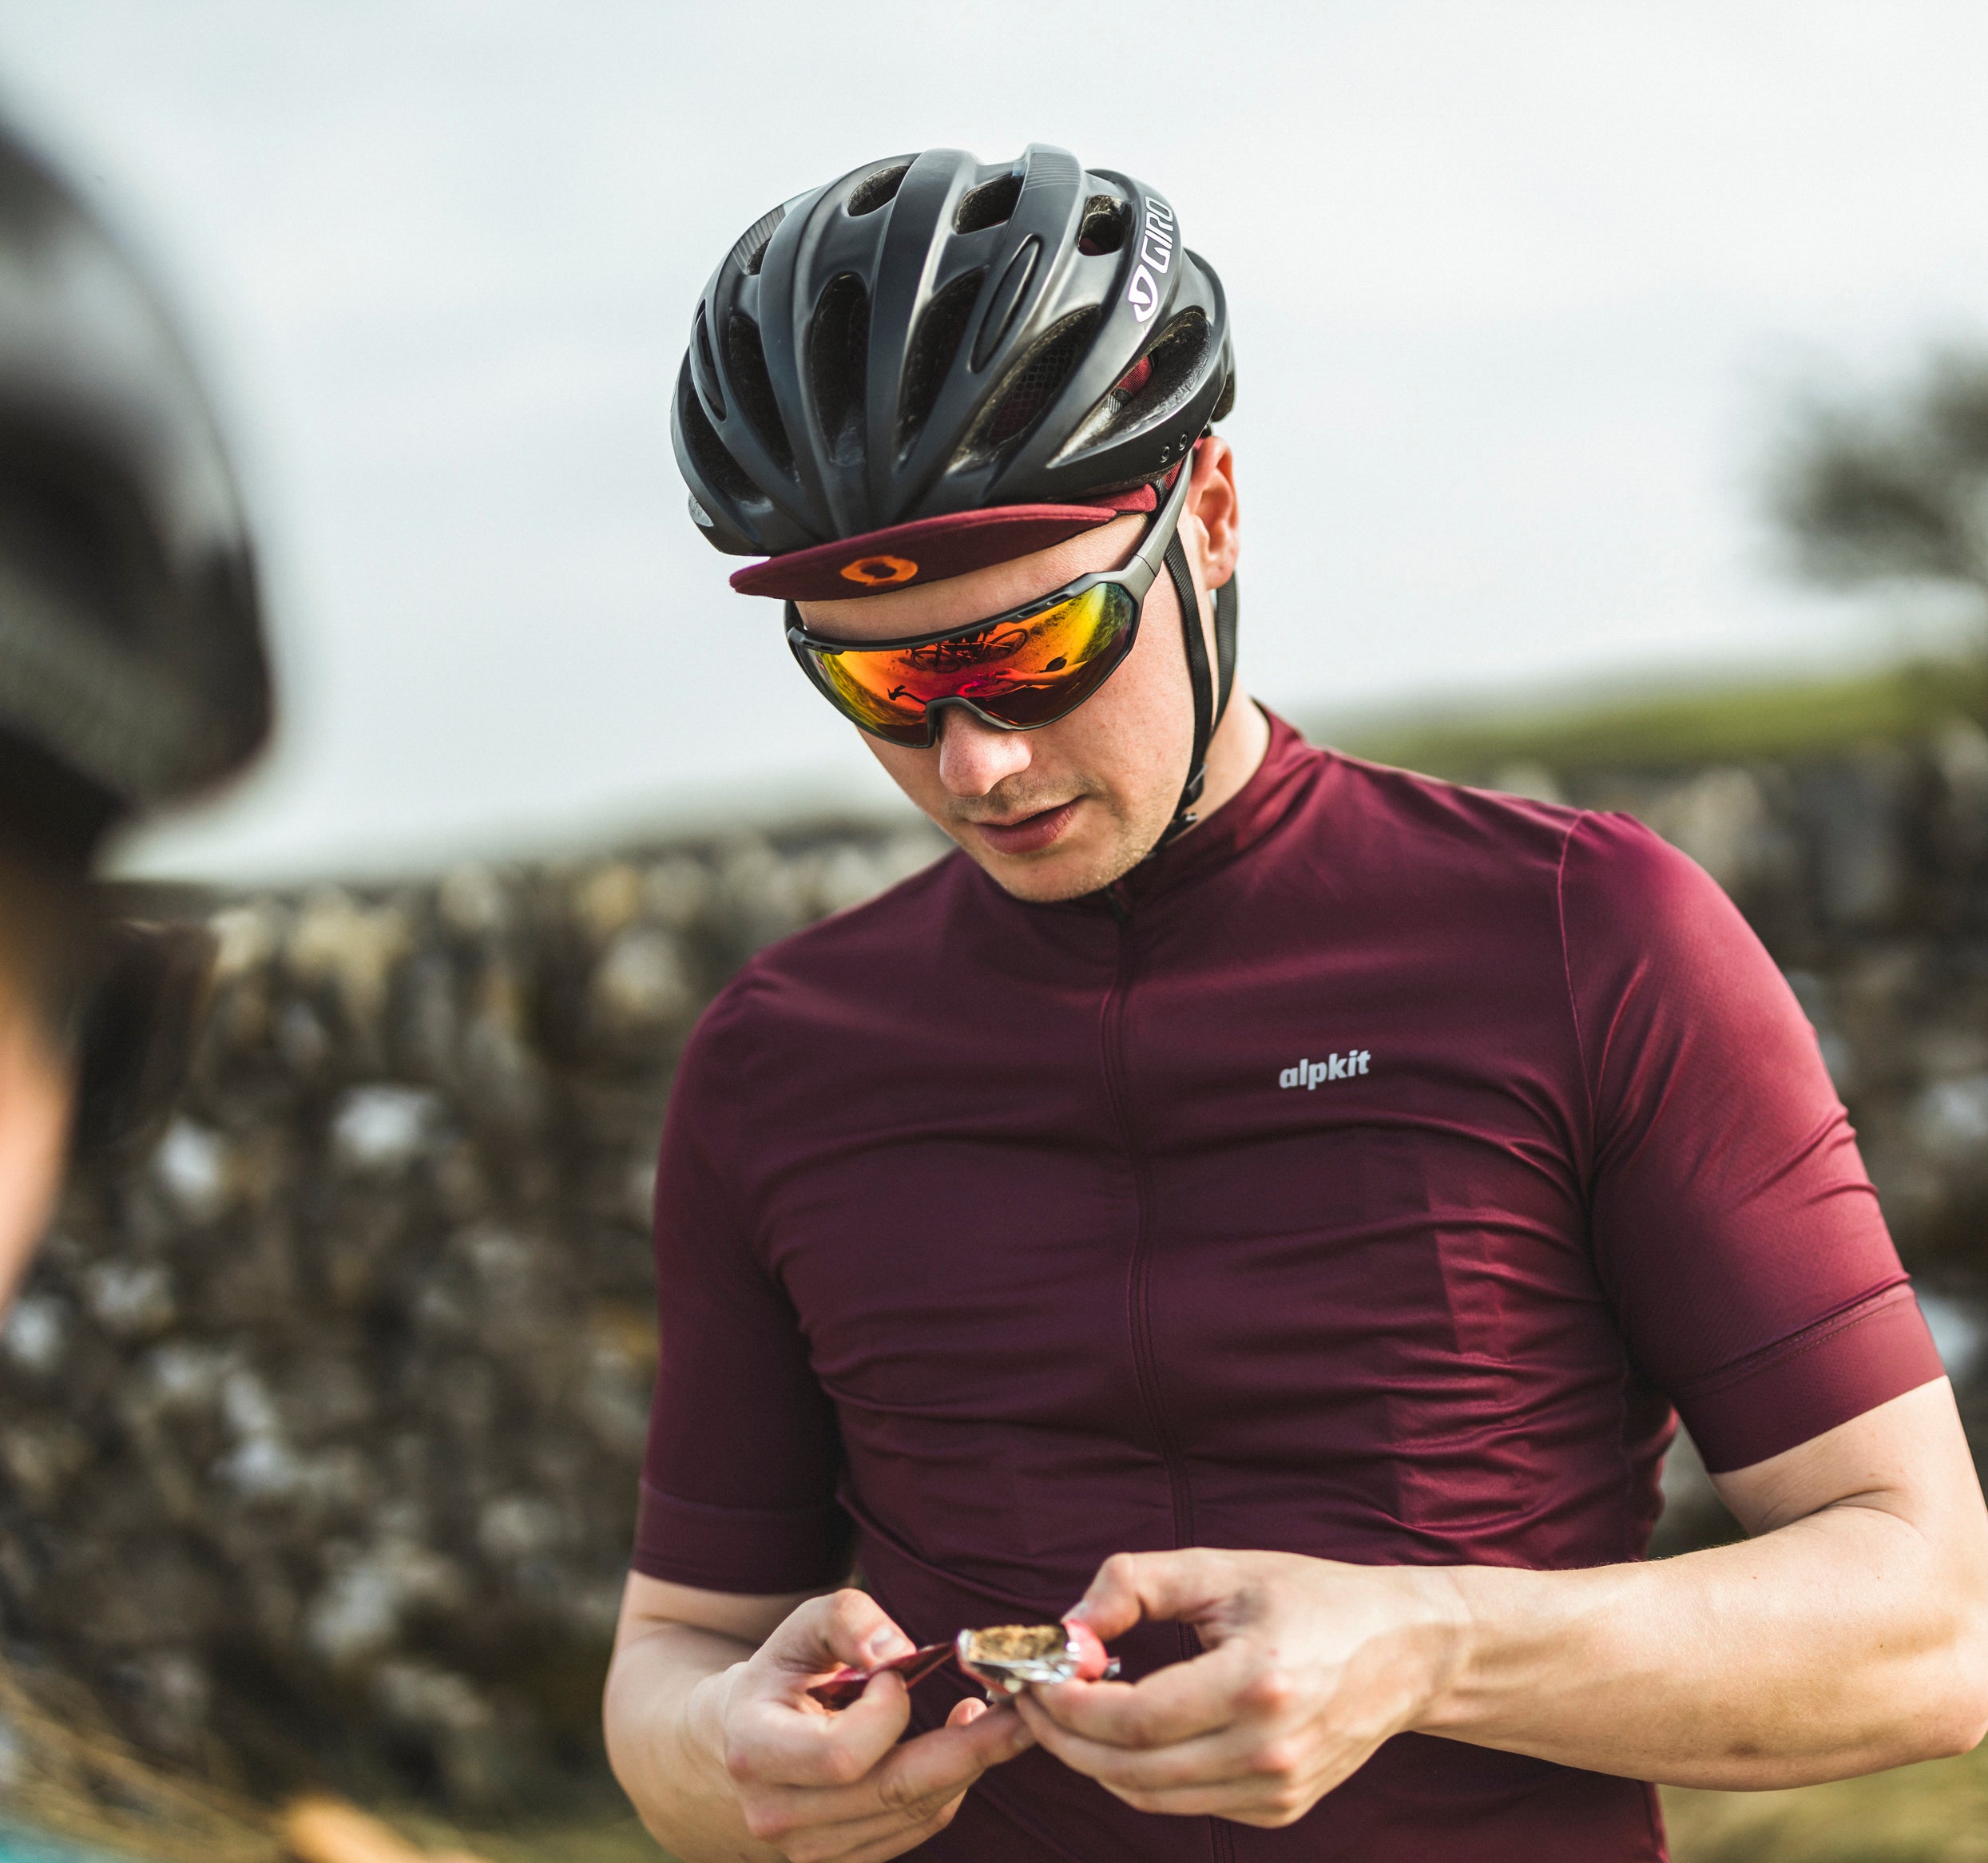 Mens Technical Cycle Clothing Range